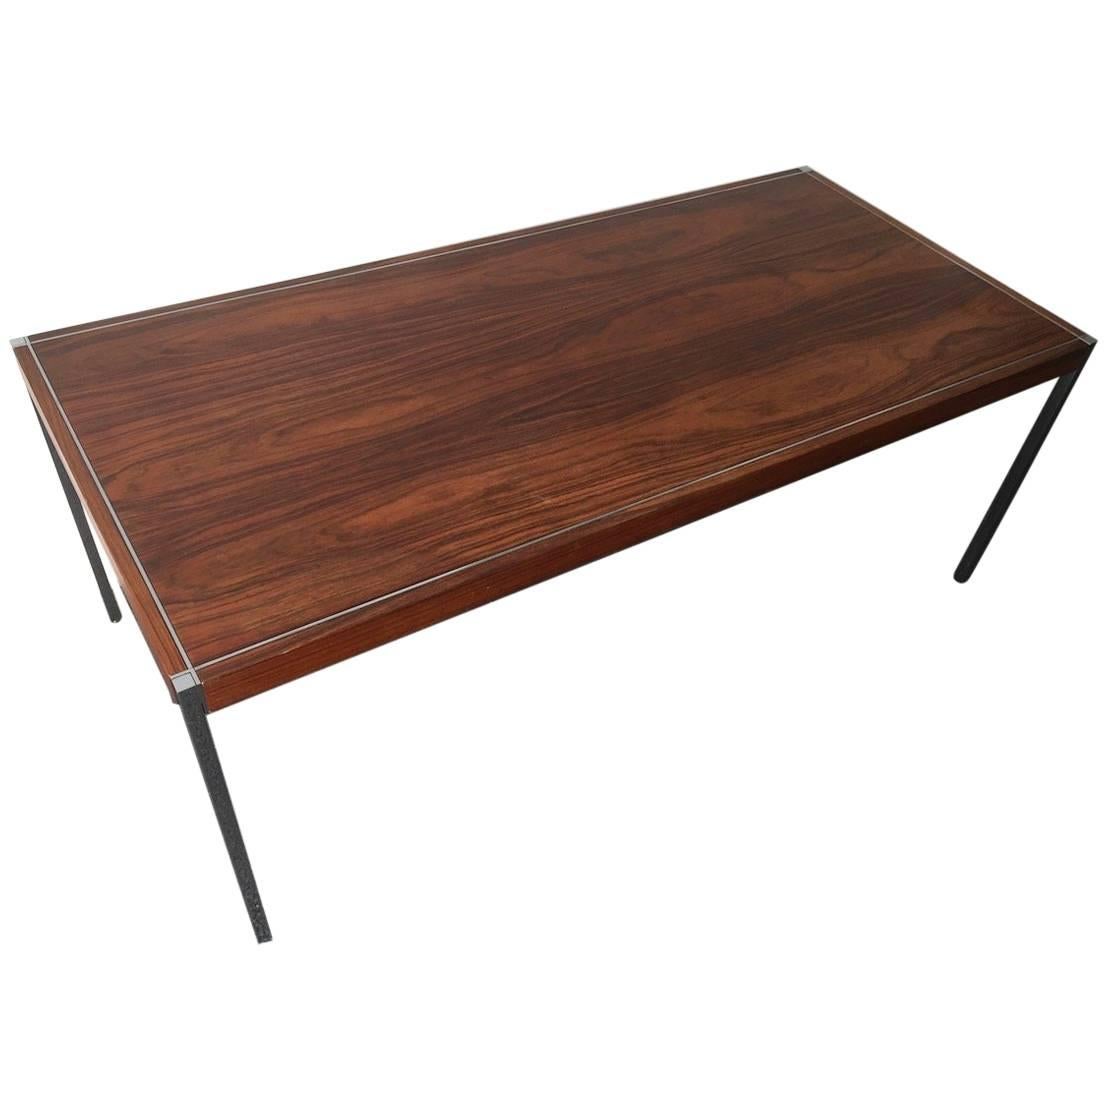 Rare Rosewood Dining Table or Desk by Richard Schultz for Knoll